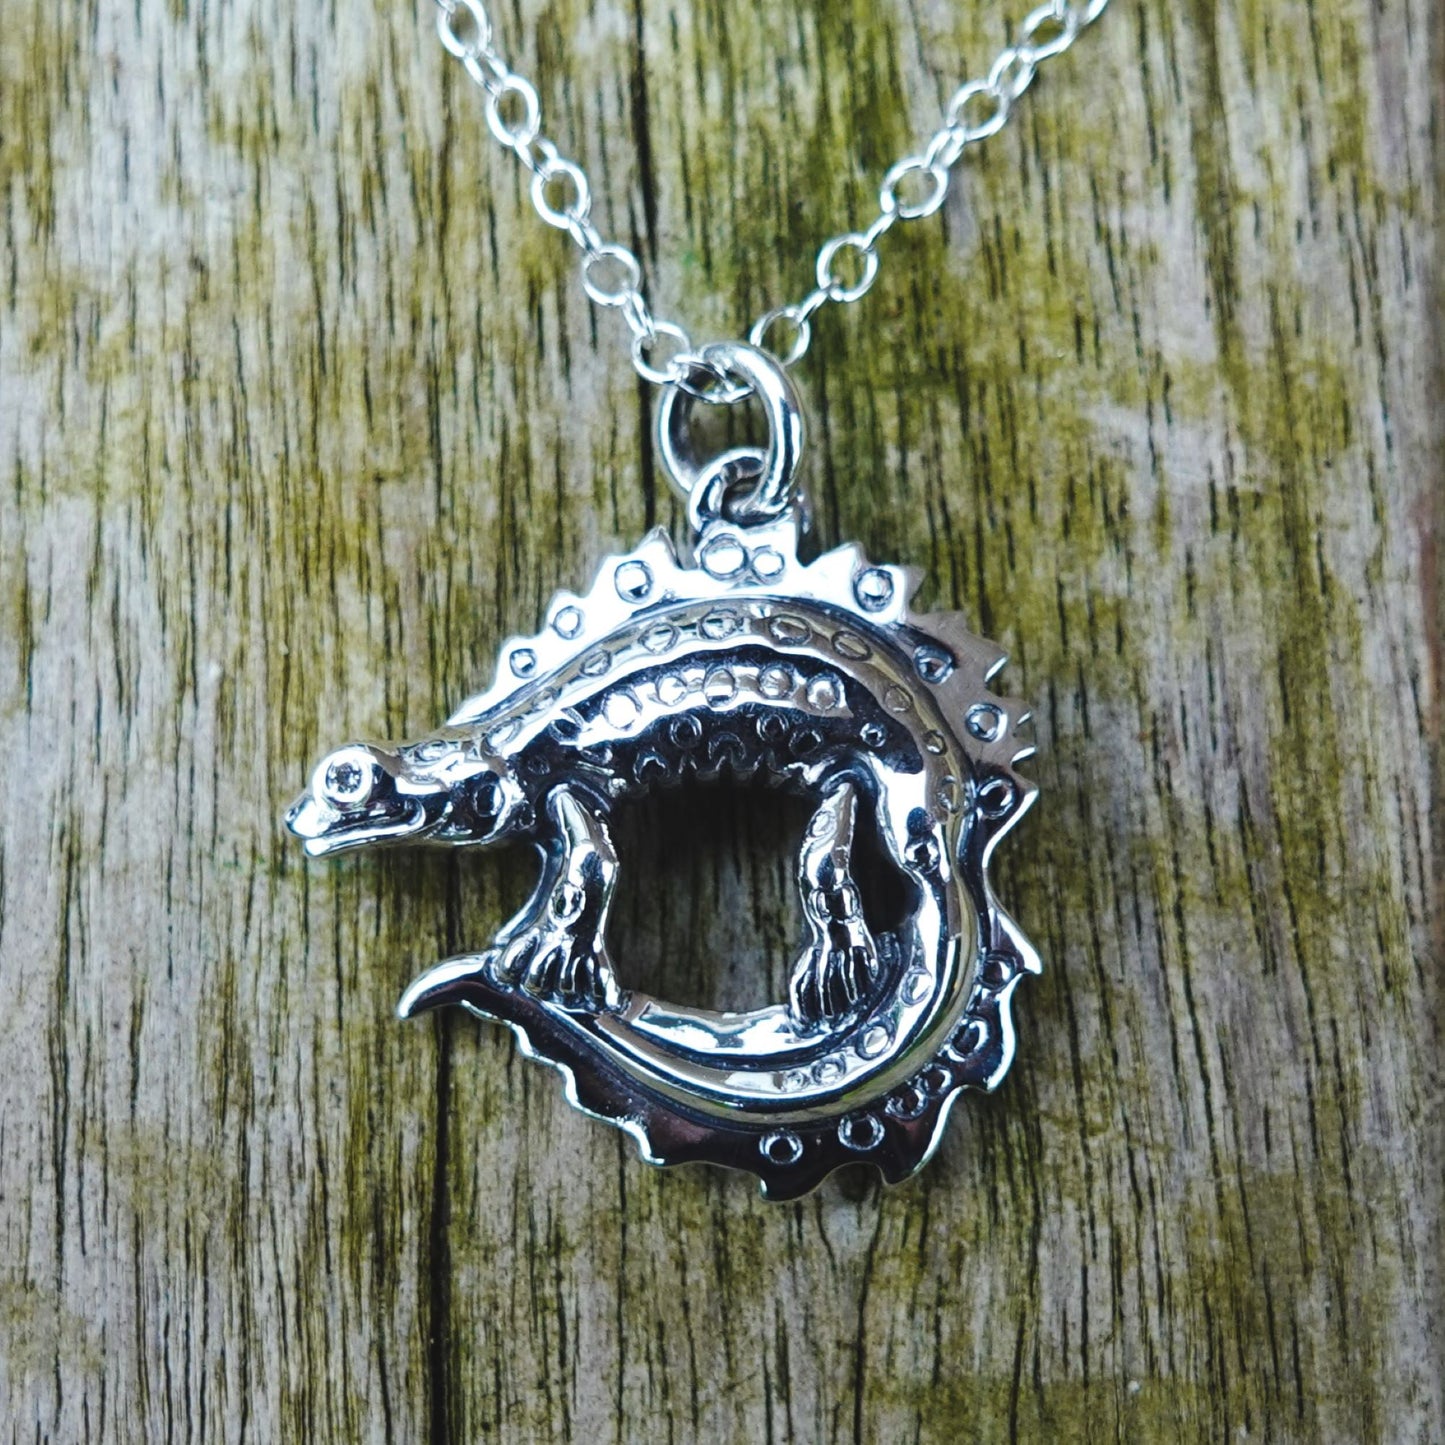 The Great Crested Newt (Triturus cristatus)  pendant with a silver chain, sterling silver newt necklace, wildlife jewellery. © Adrian Ashley